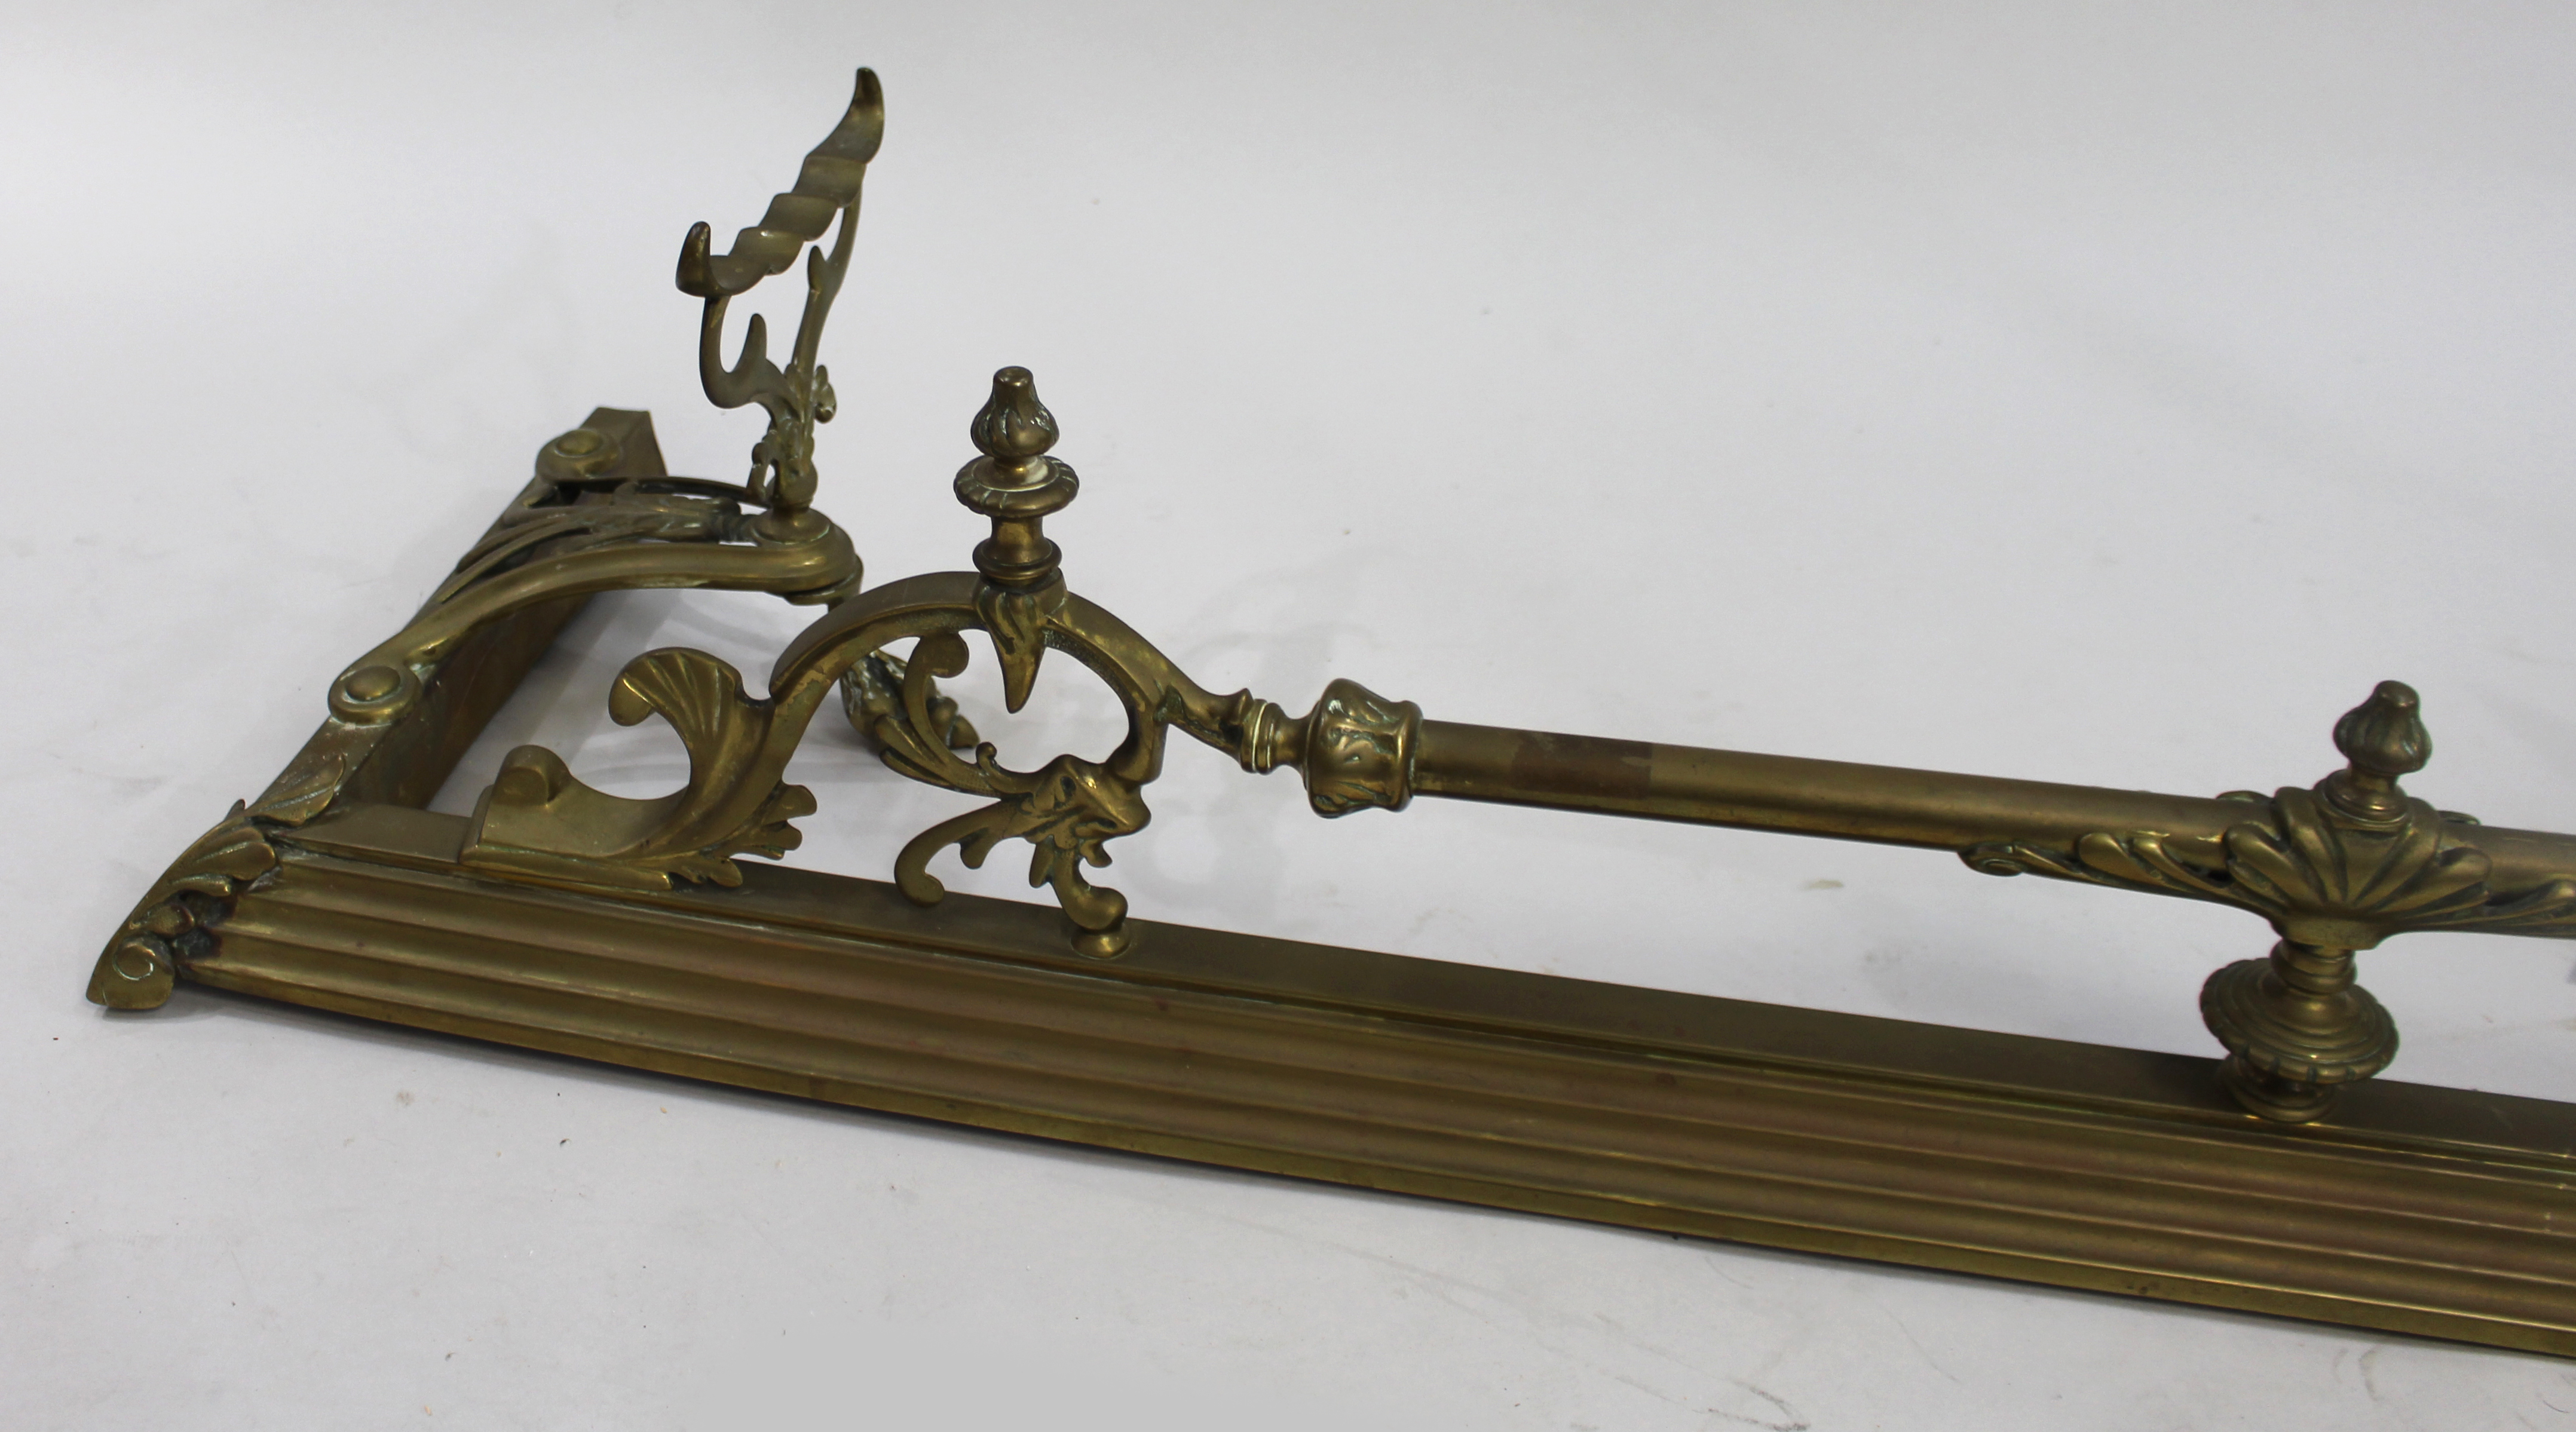 Ornate Victorian Brass Fire Fender with Rests - Image 2 of 3